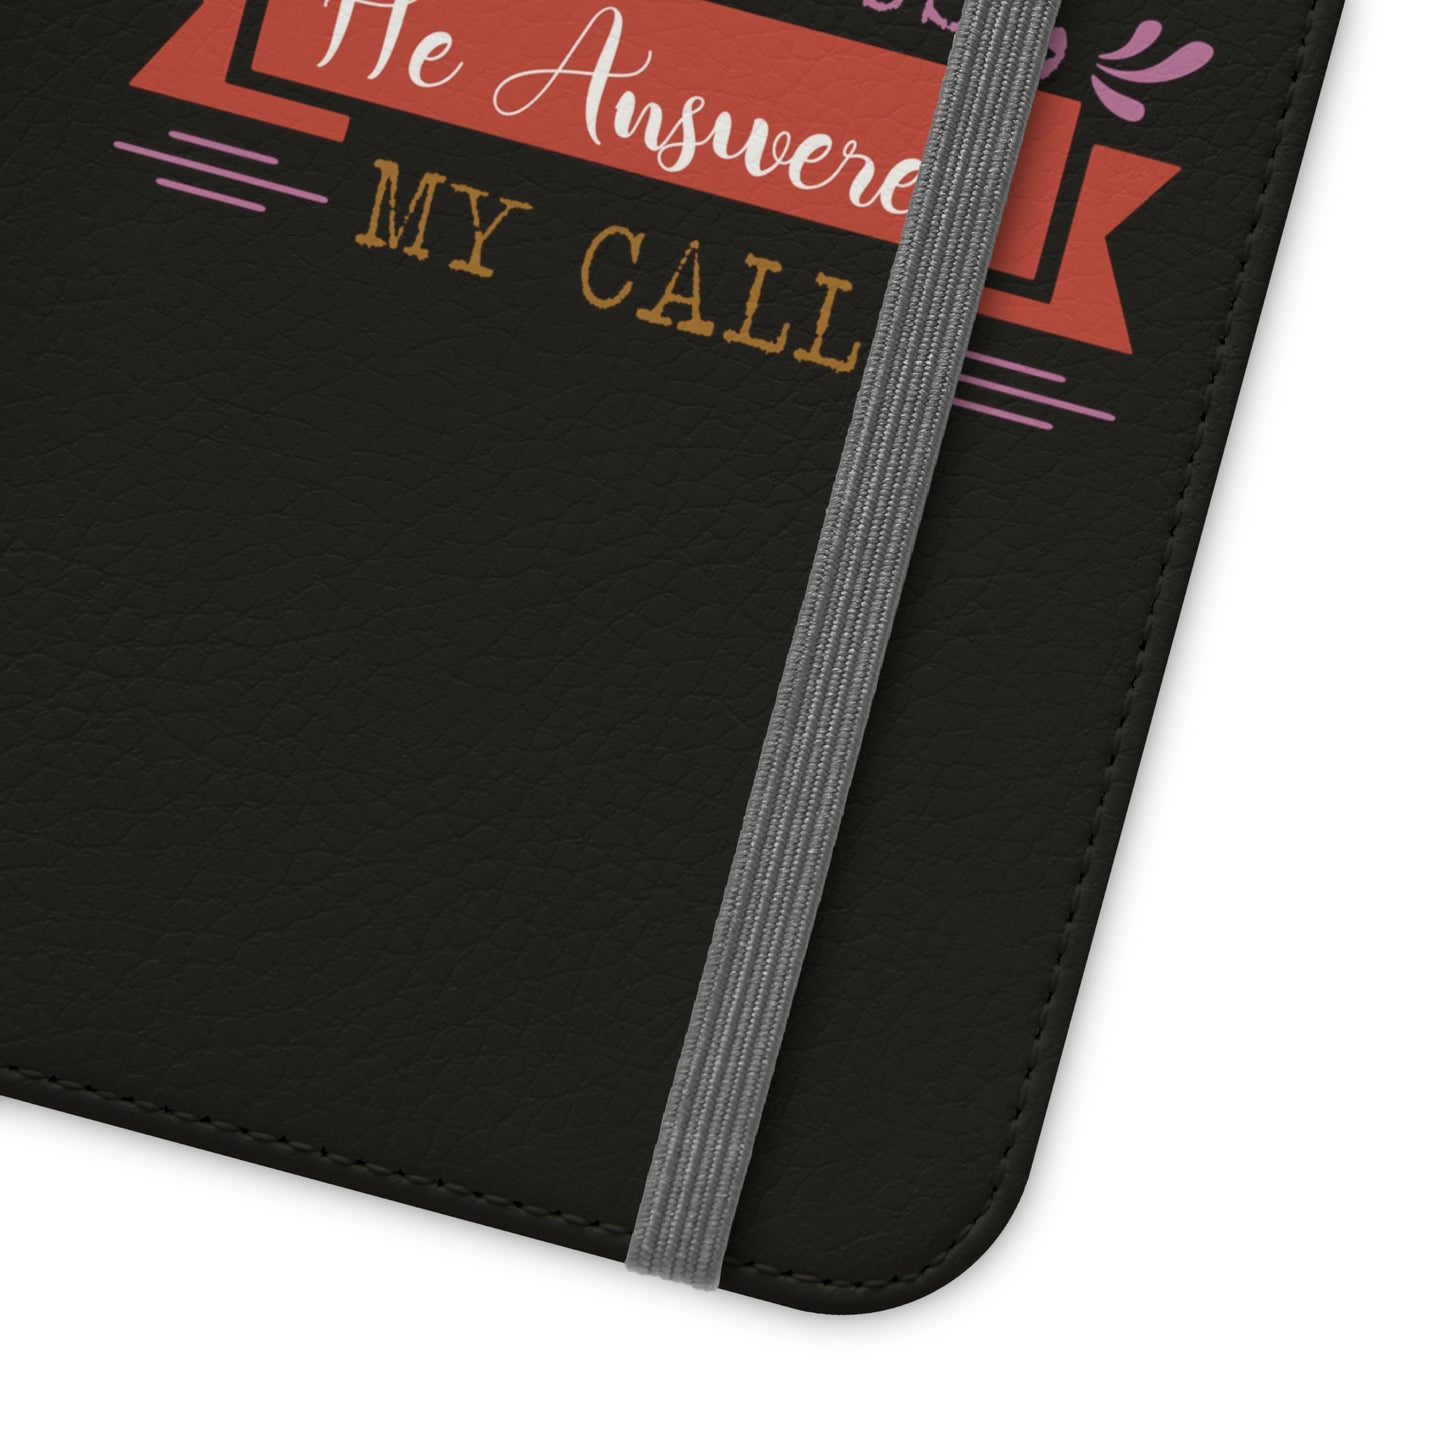 When Everyone Was Busy He Answered My Call Phone Flip Cases